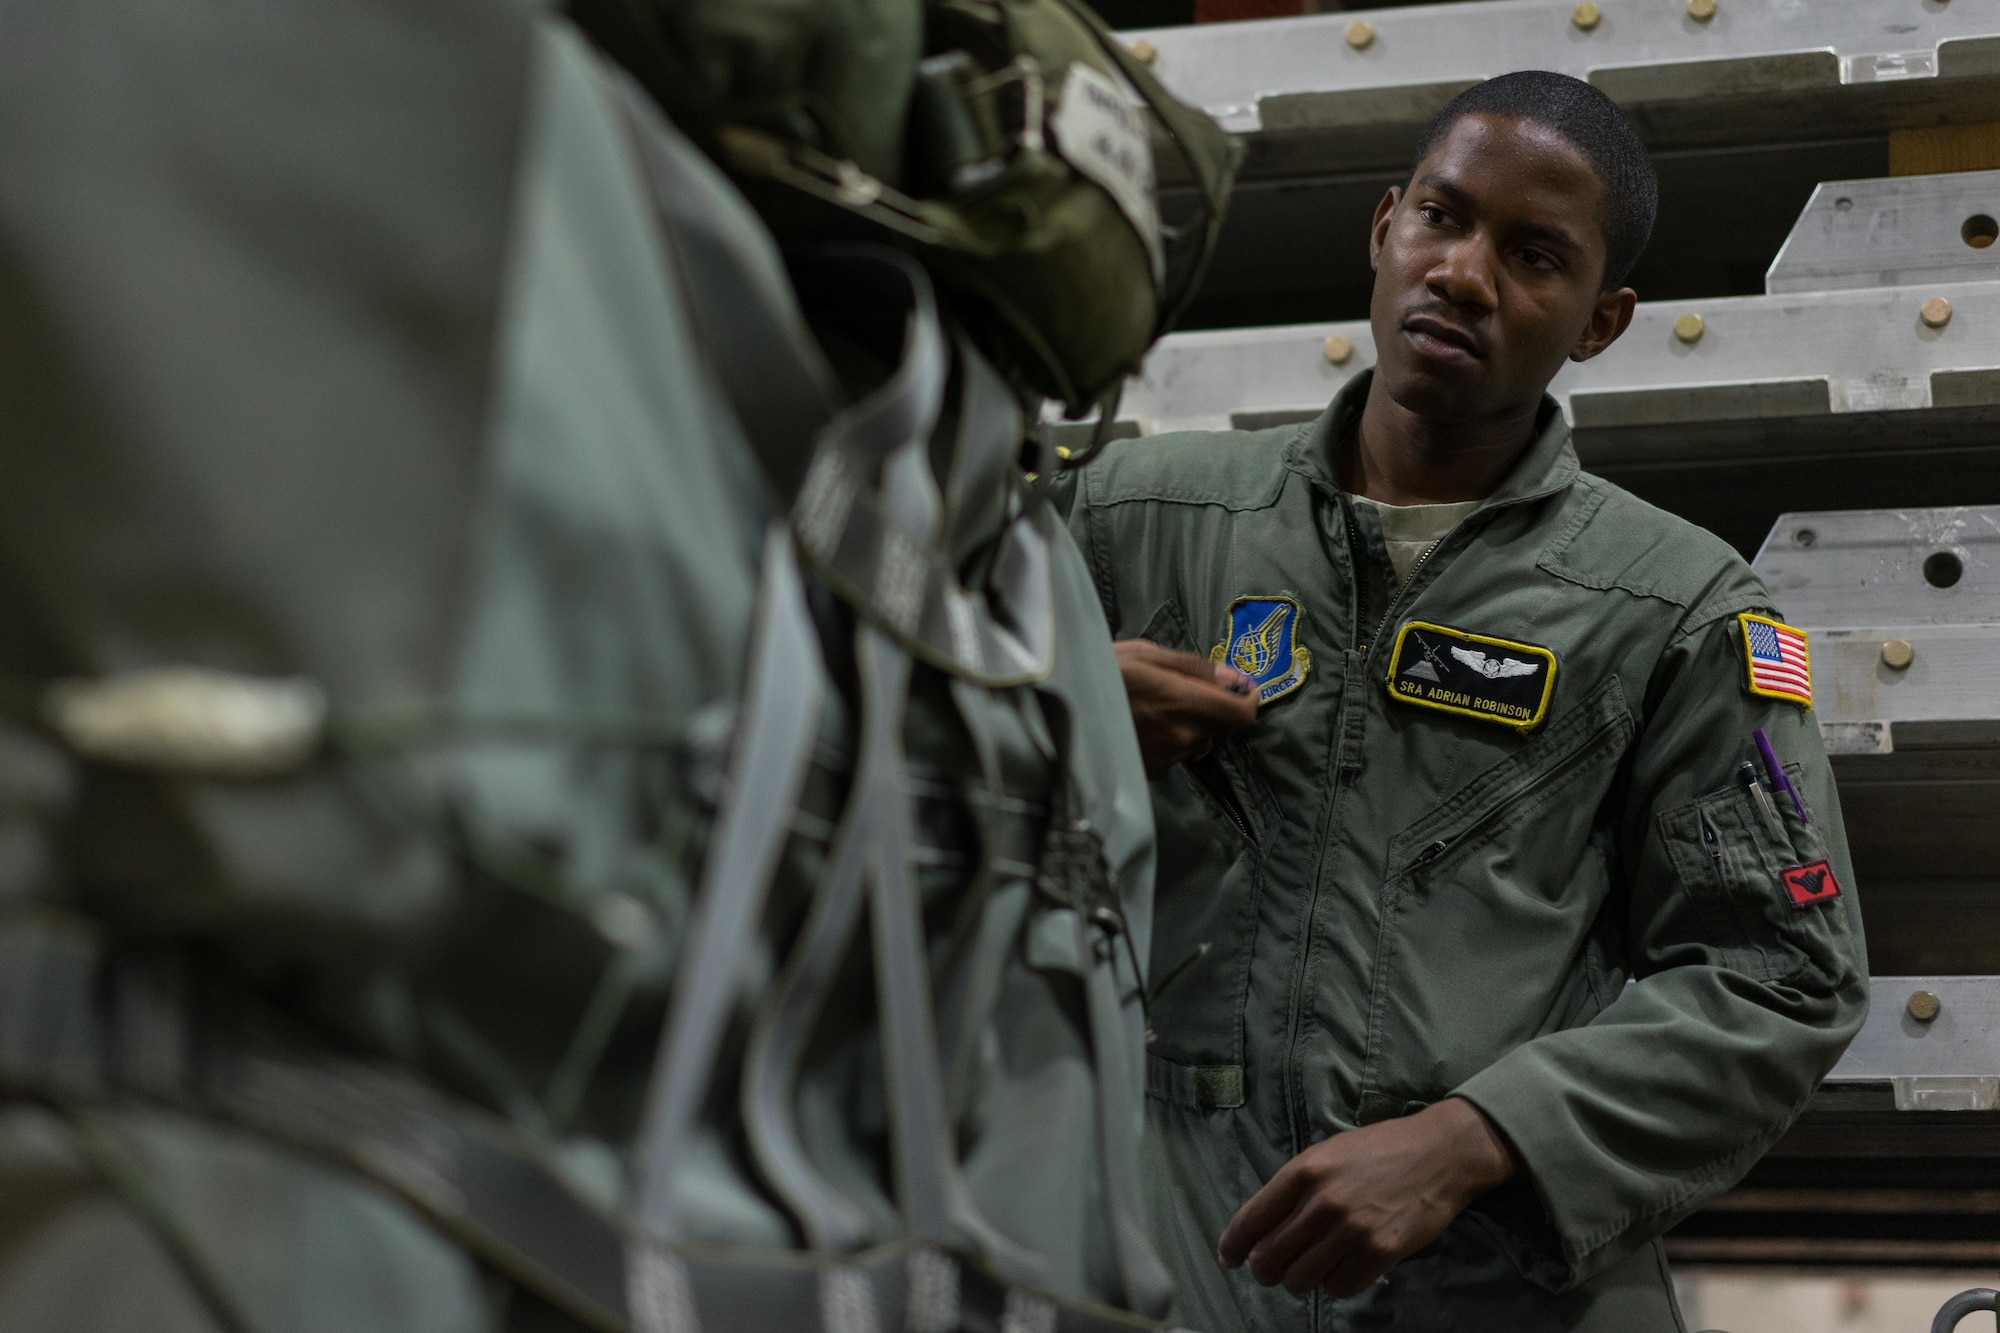 U.S. Air Force Senior Airman Adrian Robinson, 36th Airlift Squadron joint airdrop inspector, inspects the rigging on a container delivery system bundle during Red Flag Alaska on Joint Base Elmendorf-Richardson, Alaska, Aug. 11, 2016. Bundles that are improperly rigged can lead to malfunctions which hold the risk of damaging aircraft, personnel and can lead to mission failure. (U.S. Air Force photo by Staff Sgt. Michael Smith/Released)